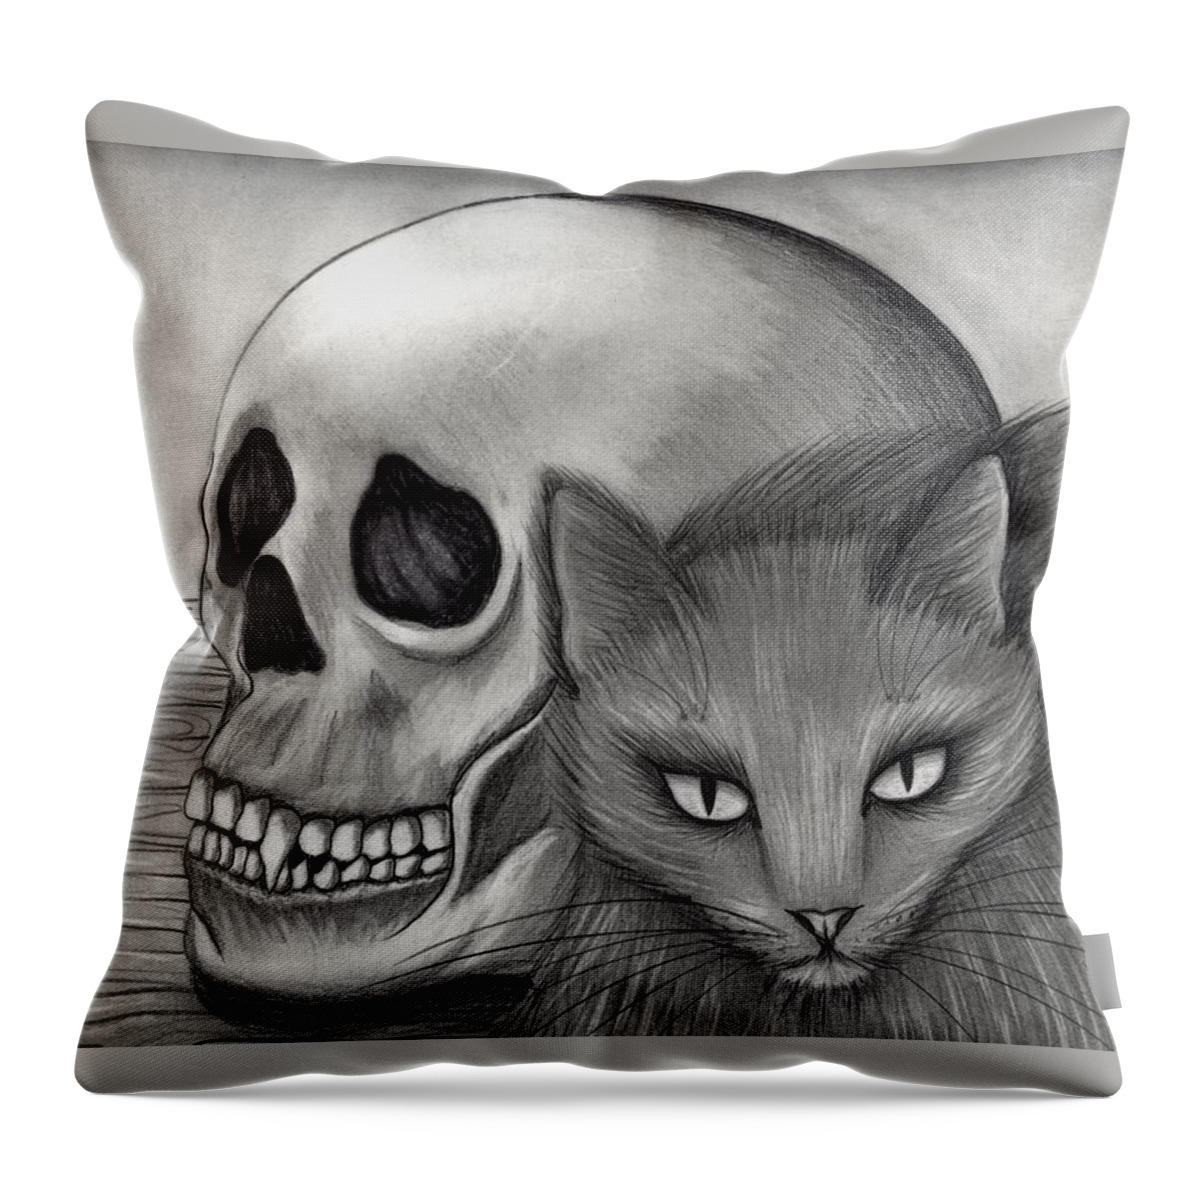 Black Cat Throw Pillow featuring the drawing Witch's Cat Eyes by Carrie Hawks